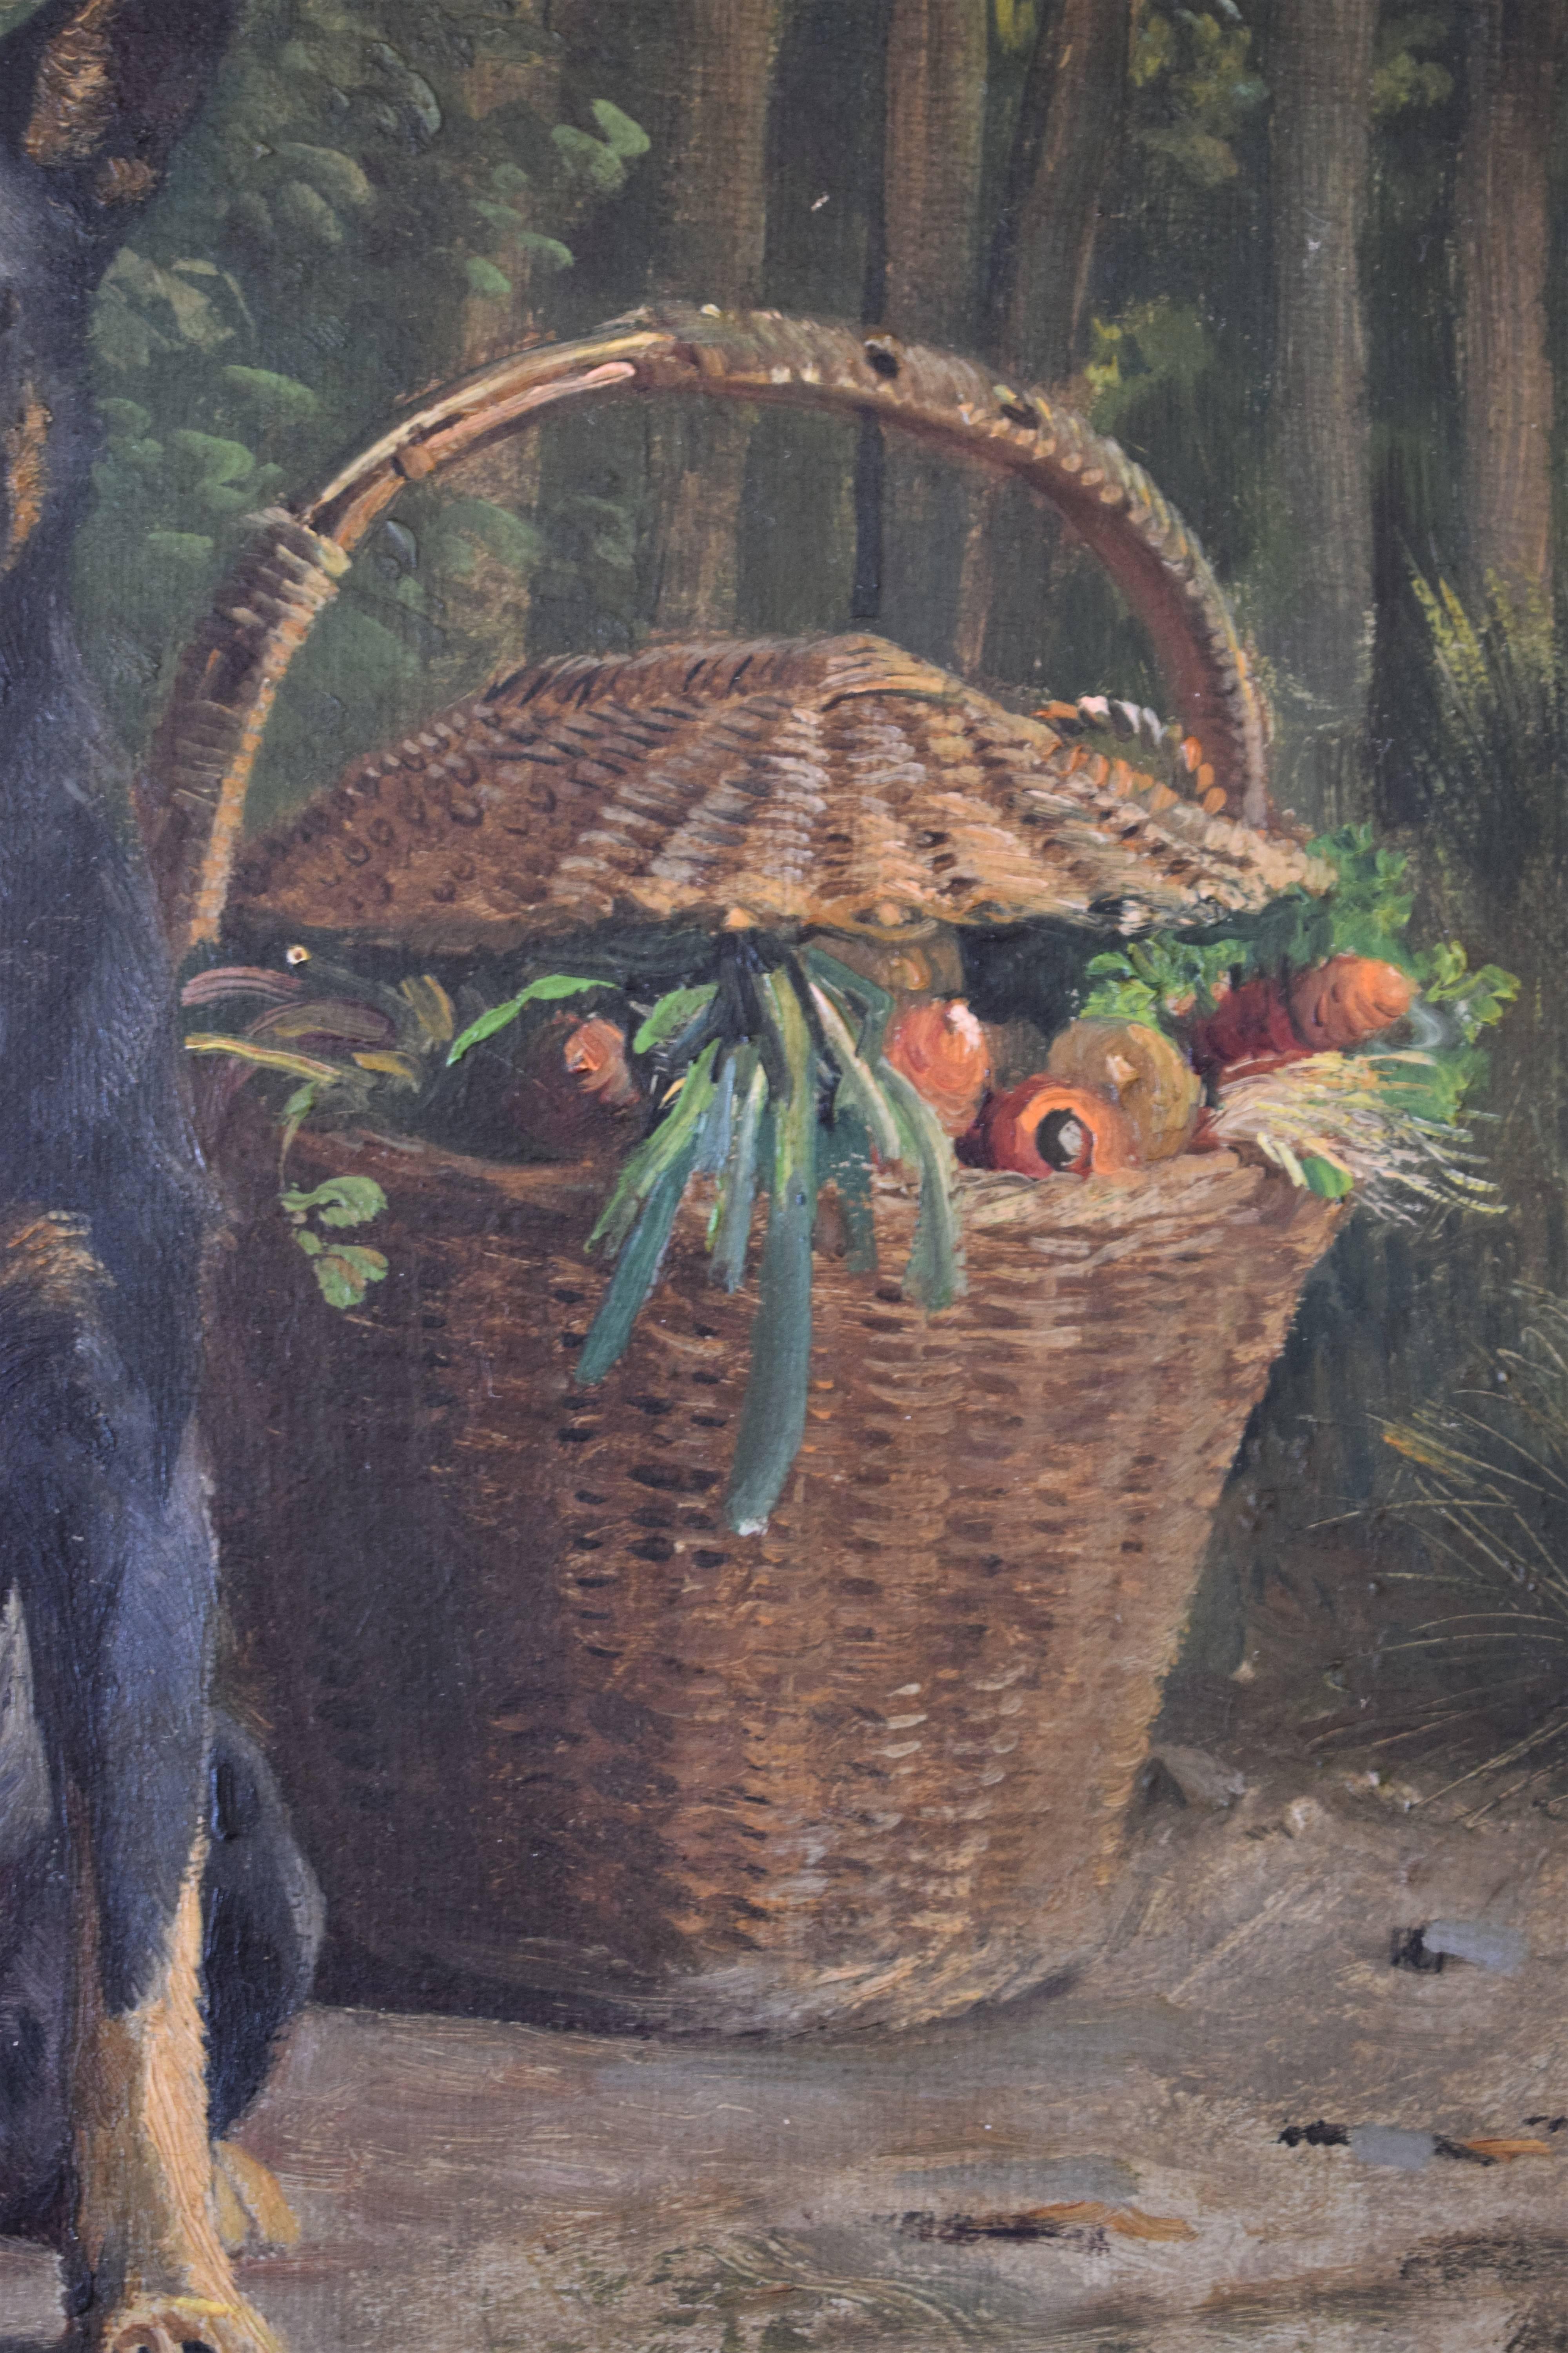 Danish 19th Century, a Dog Poses next to a Basket by Oluf August Hermansen, 1882